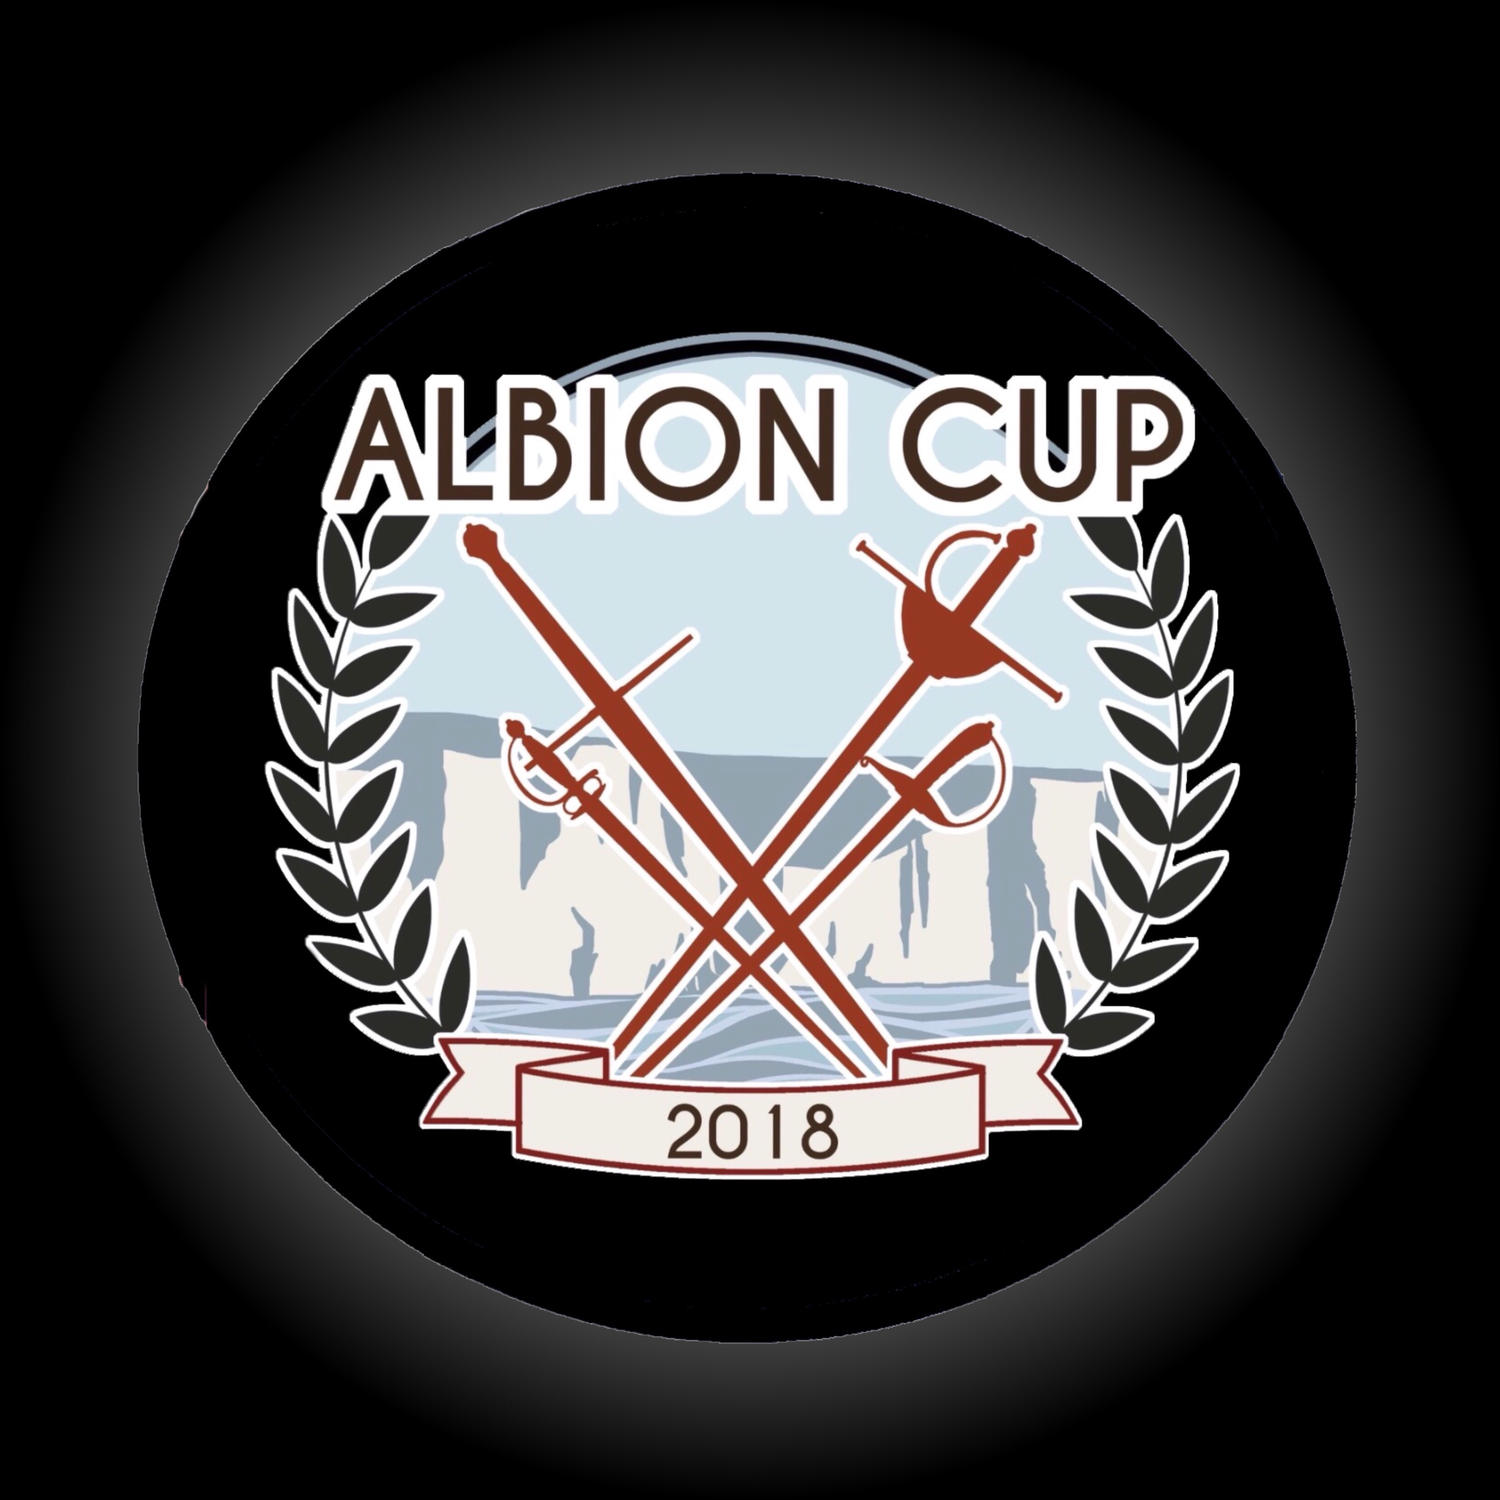 Albion Cup event tees & patches NOW AVAILABLE - collect at event.